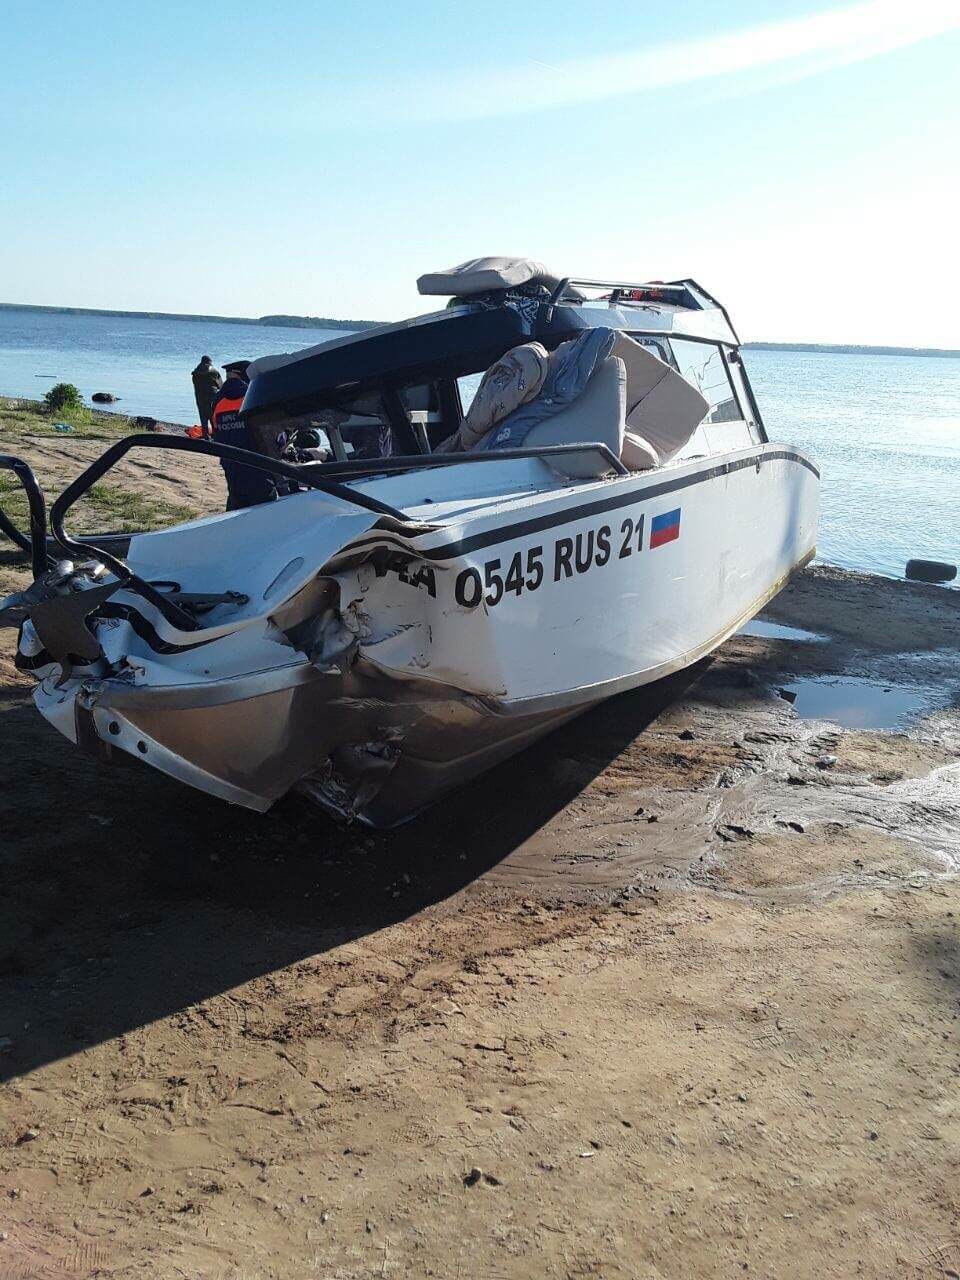 Motorboat Collides With Barge Tow on Volga River, Killing Four